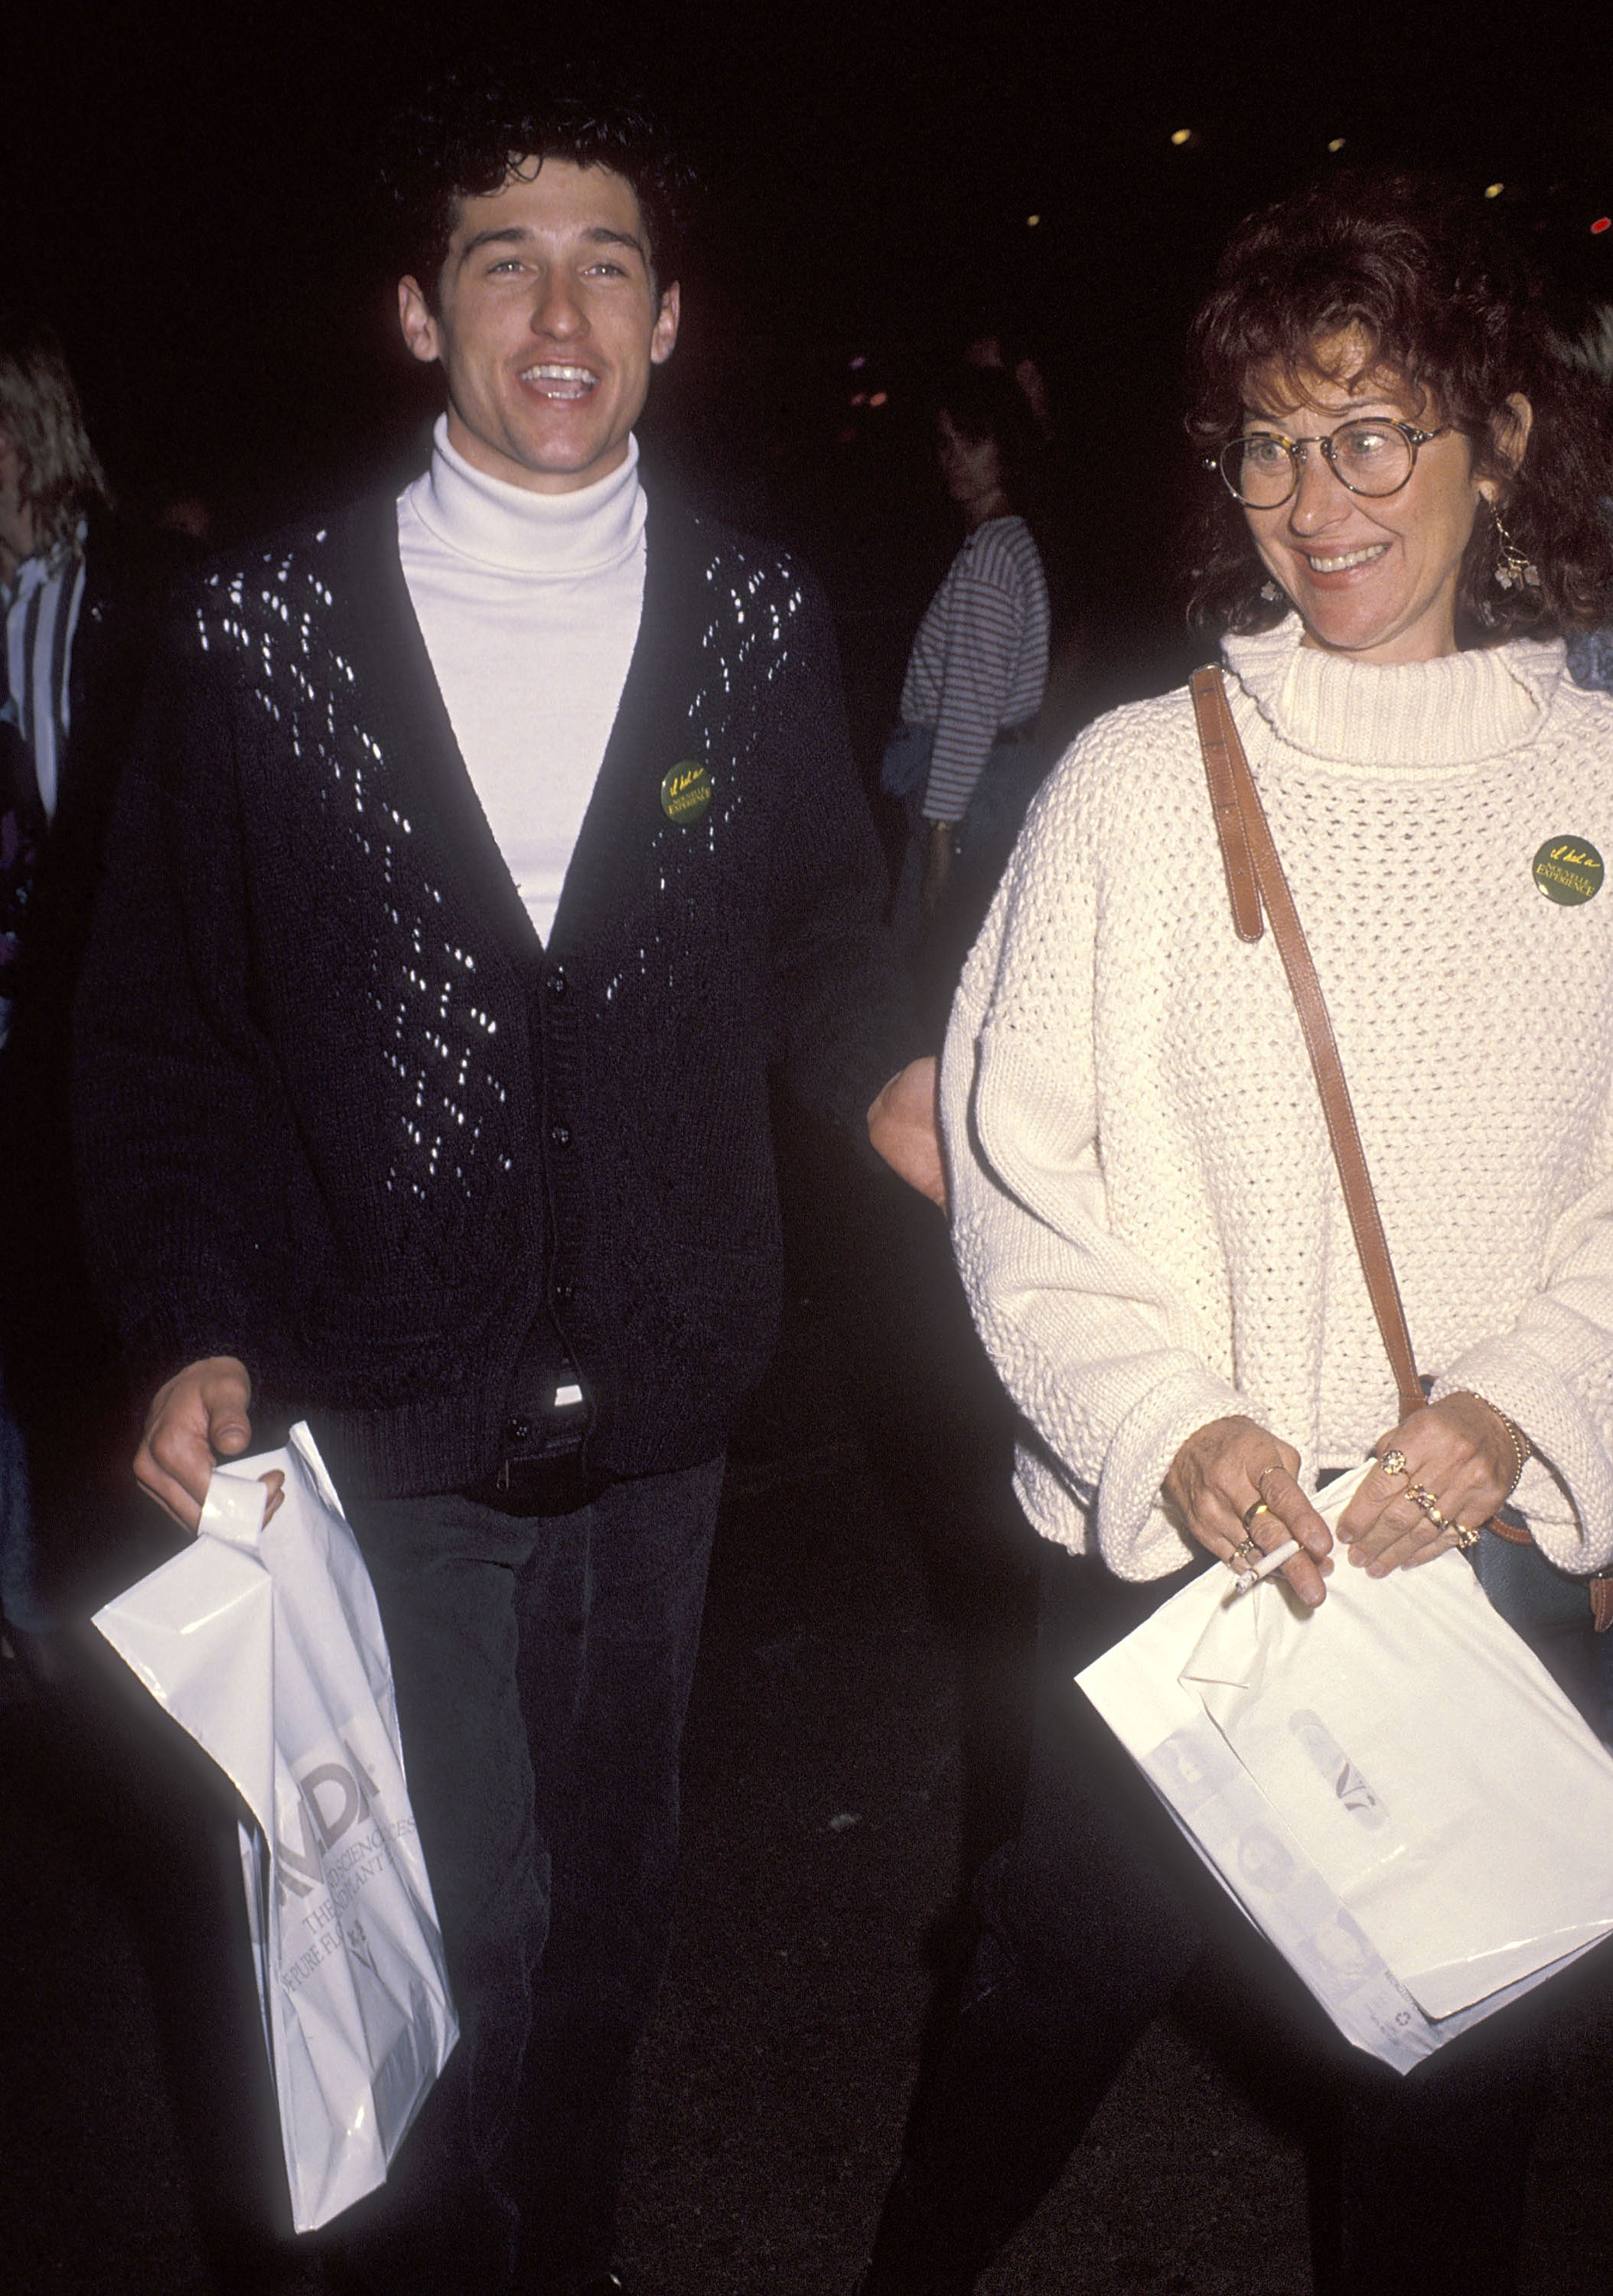 Patrick Dempsey and ex-wife Rocky Parker on October 11, 1990, in Santa Monica, California. | Source: Getty Images